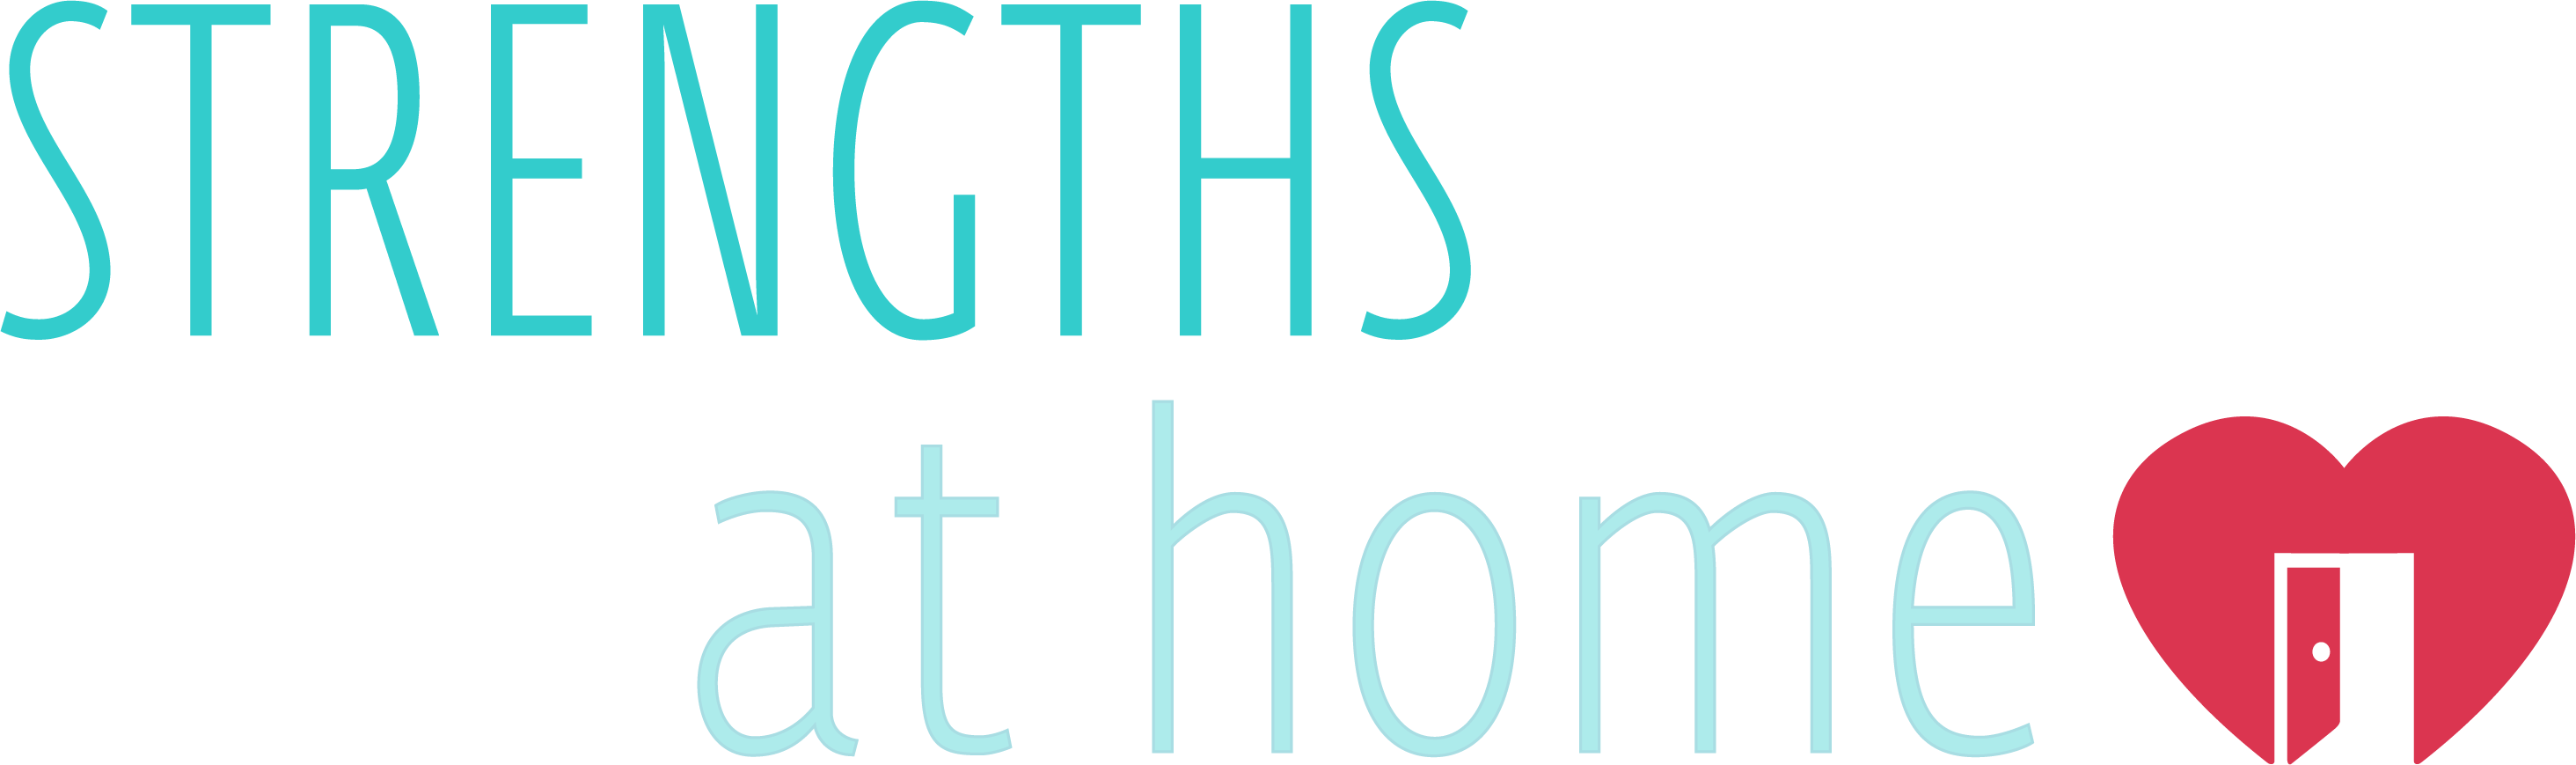 Strengths at Home with heart logo